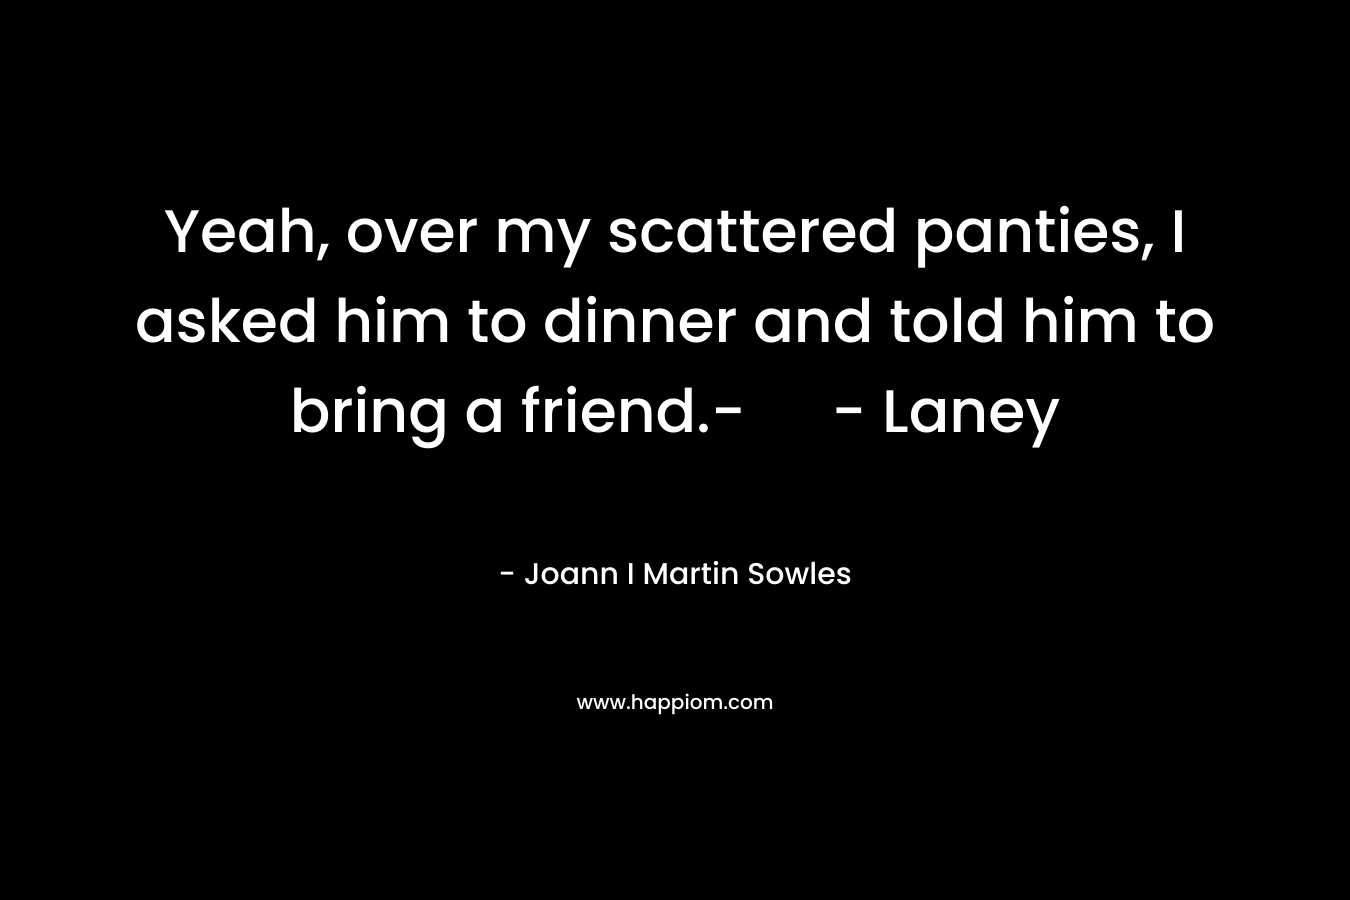 Yeah, over my scattered panties, I asked him to dinner and told him to bring a friend.- – Laney – Joann I Martin Sowles